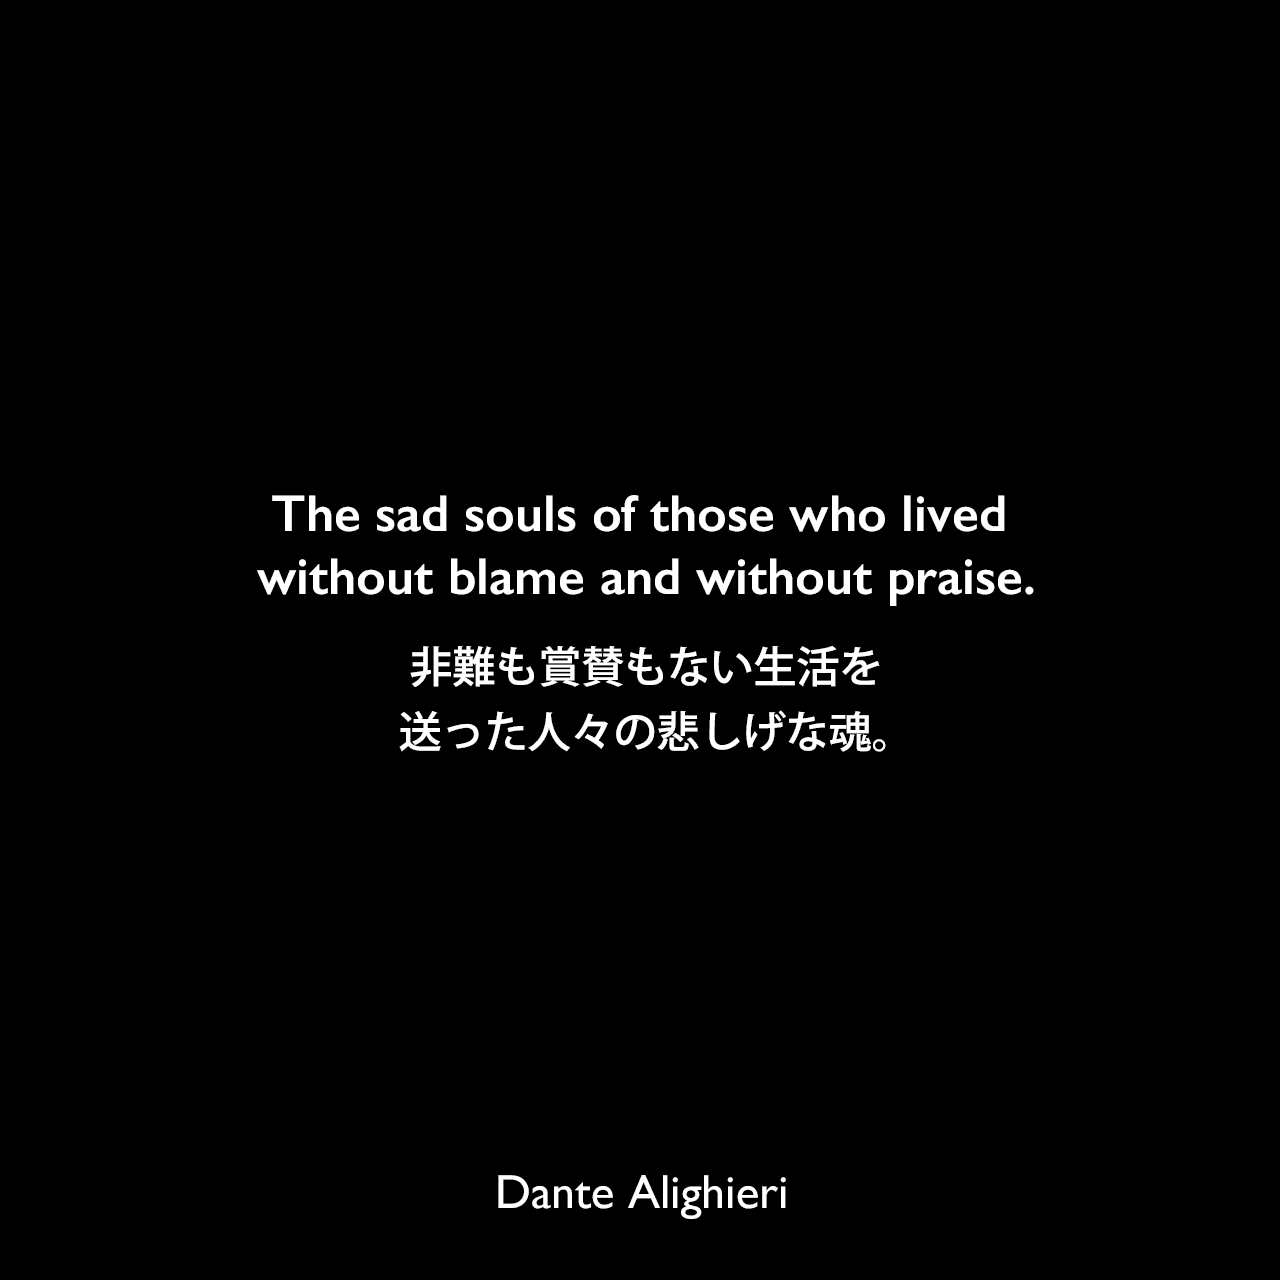 The sad souls of those who lived without blame and without praise.非難も賞賛もない生活を送った人々の悲しげな魂。Dante Alighieri